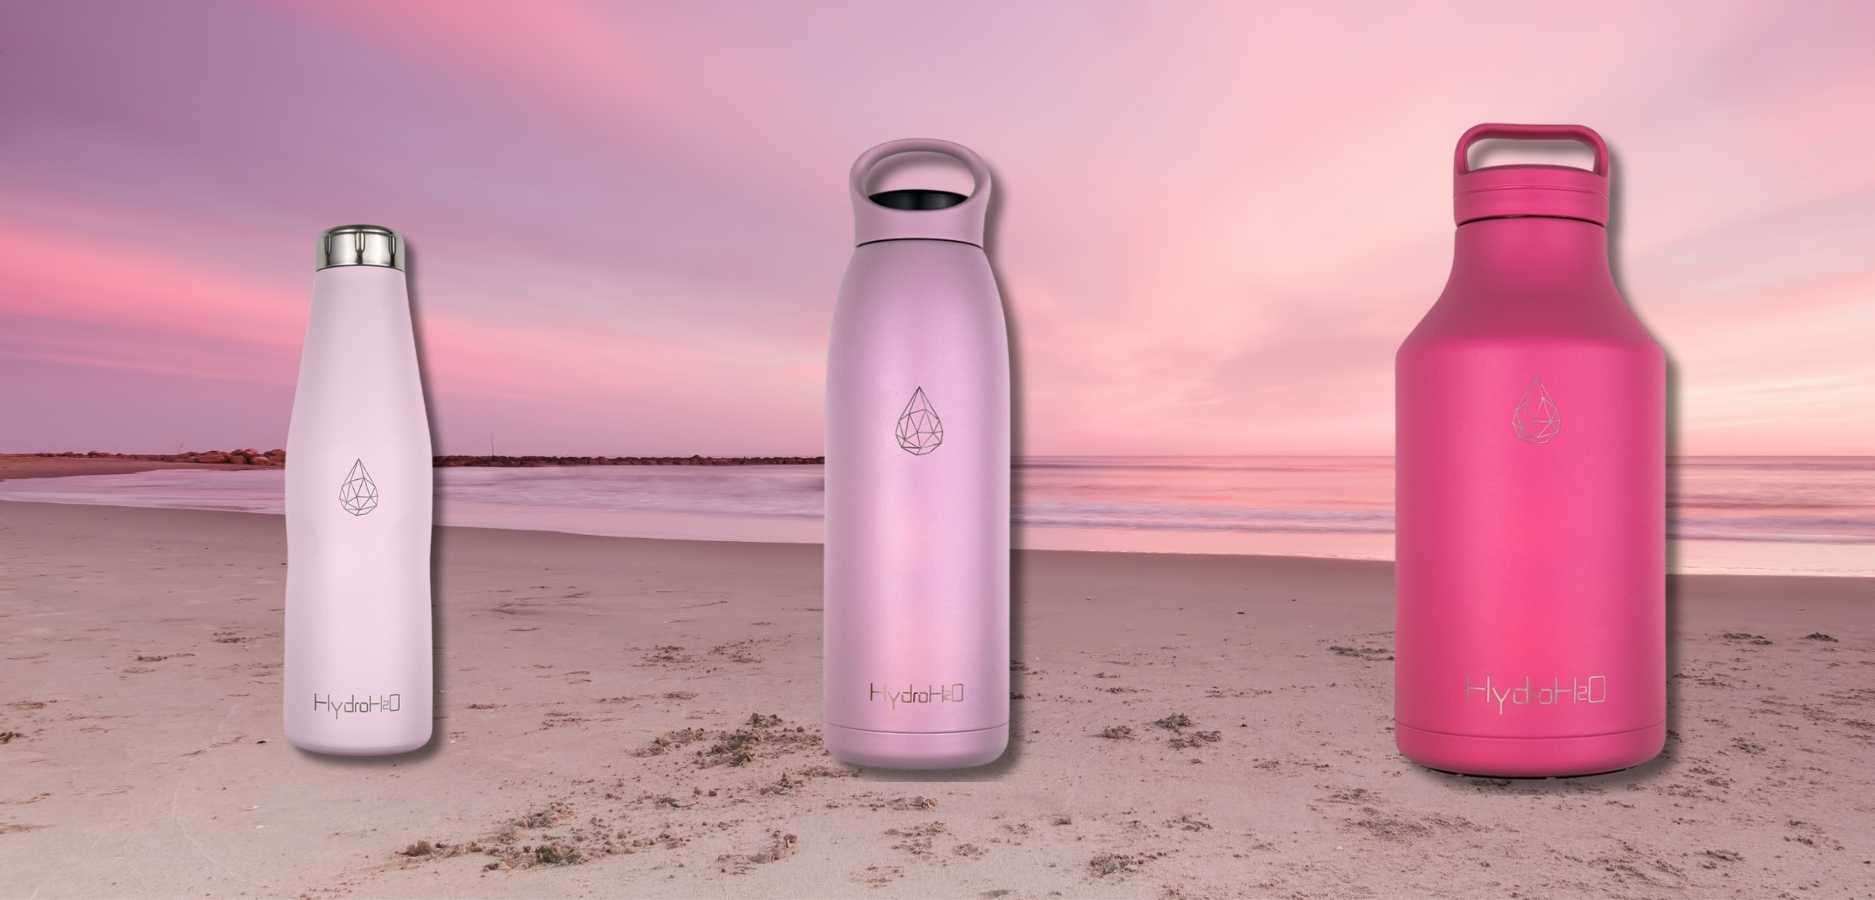 HydroH2O_Stainless_Steel_Water_Bottle_Sunset_Inspired_Pink_Bottles_On_Sunset_Background